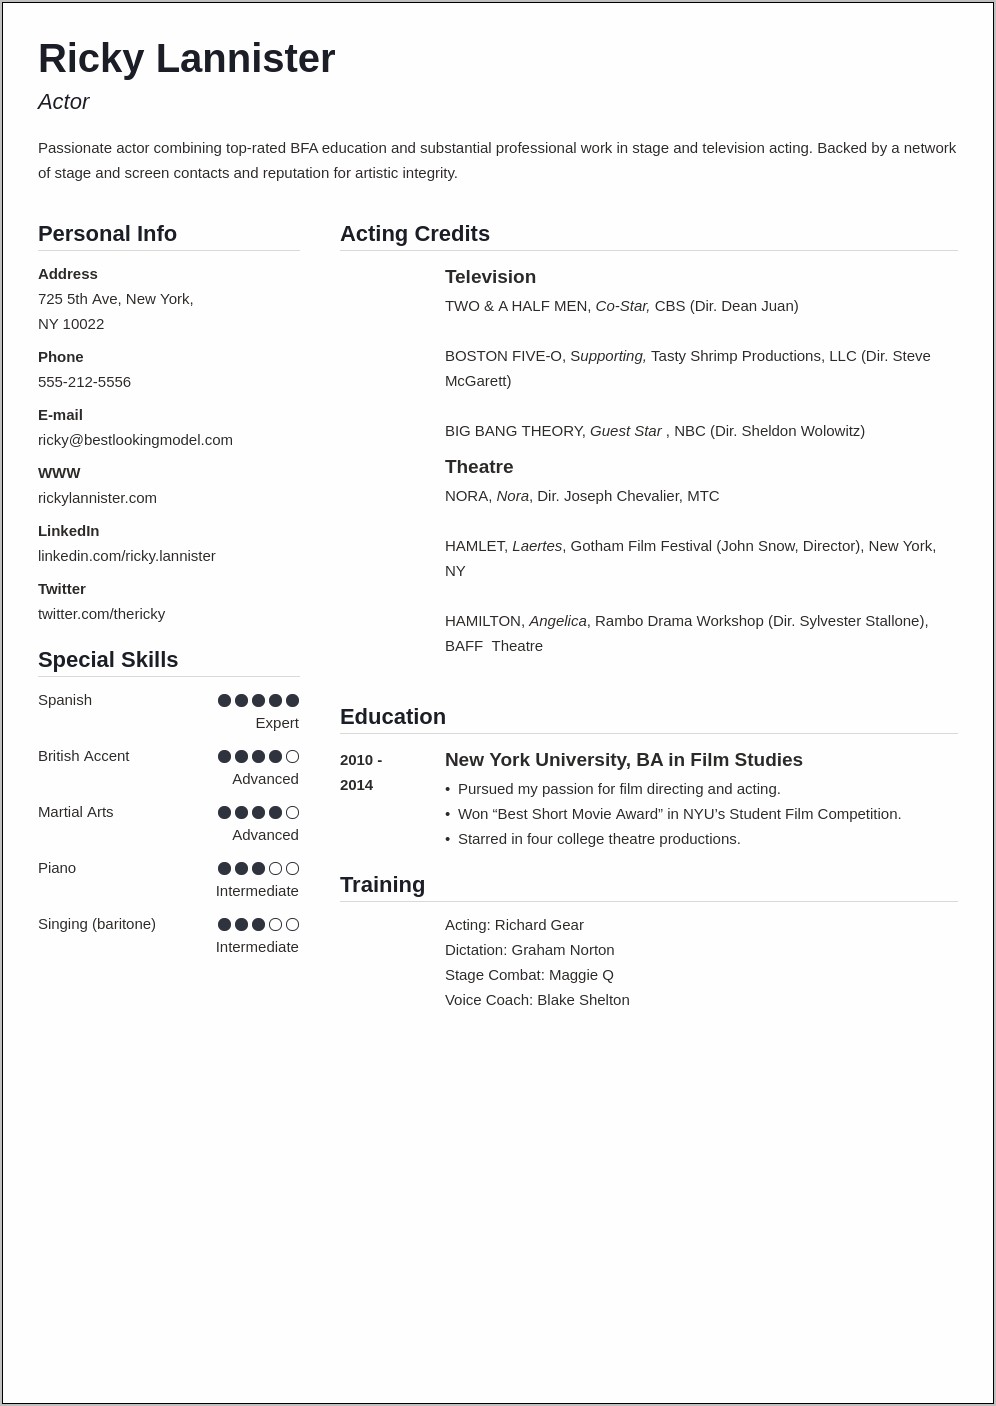 Example Of An Actor's Resume